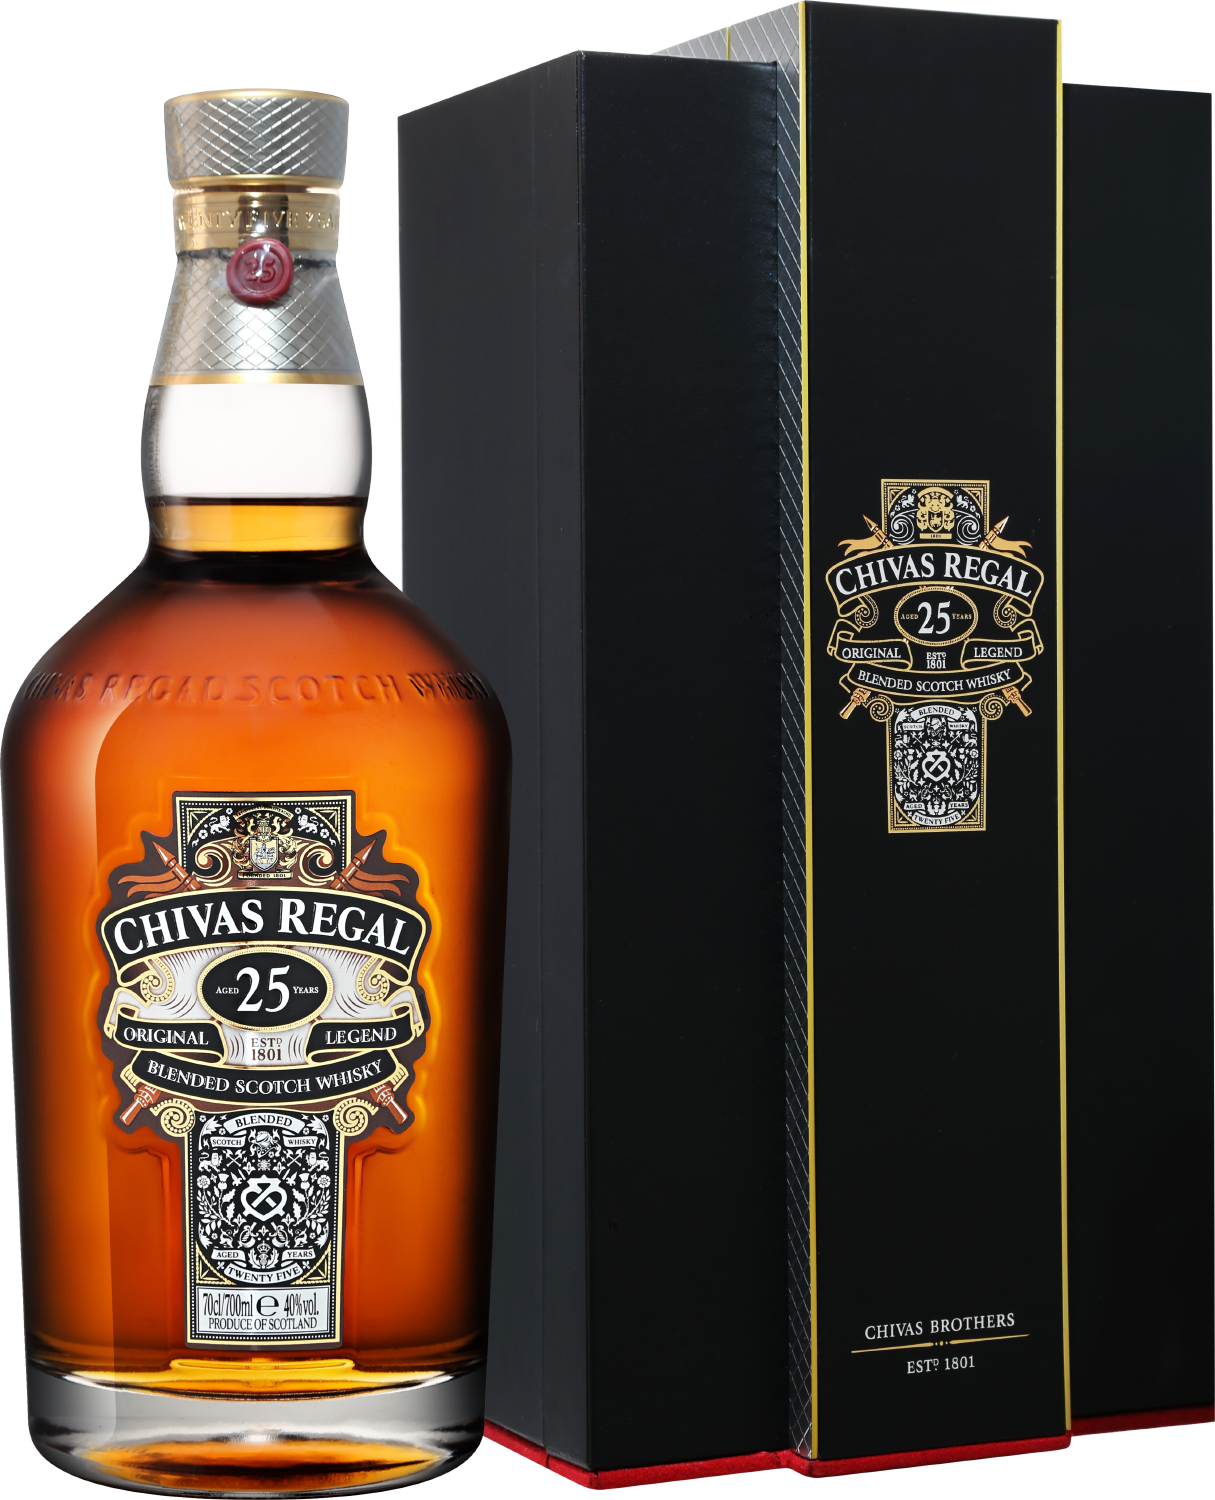 Chivas Regal Blended Scotch Whisky 25 y.o. (gift box) chivas regal extra blended scotch whisky gift box